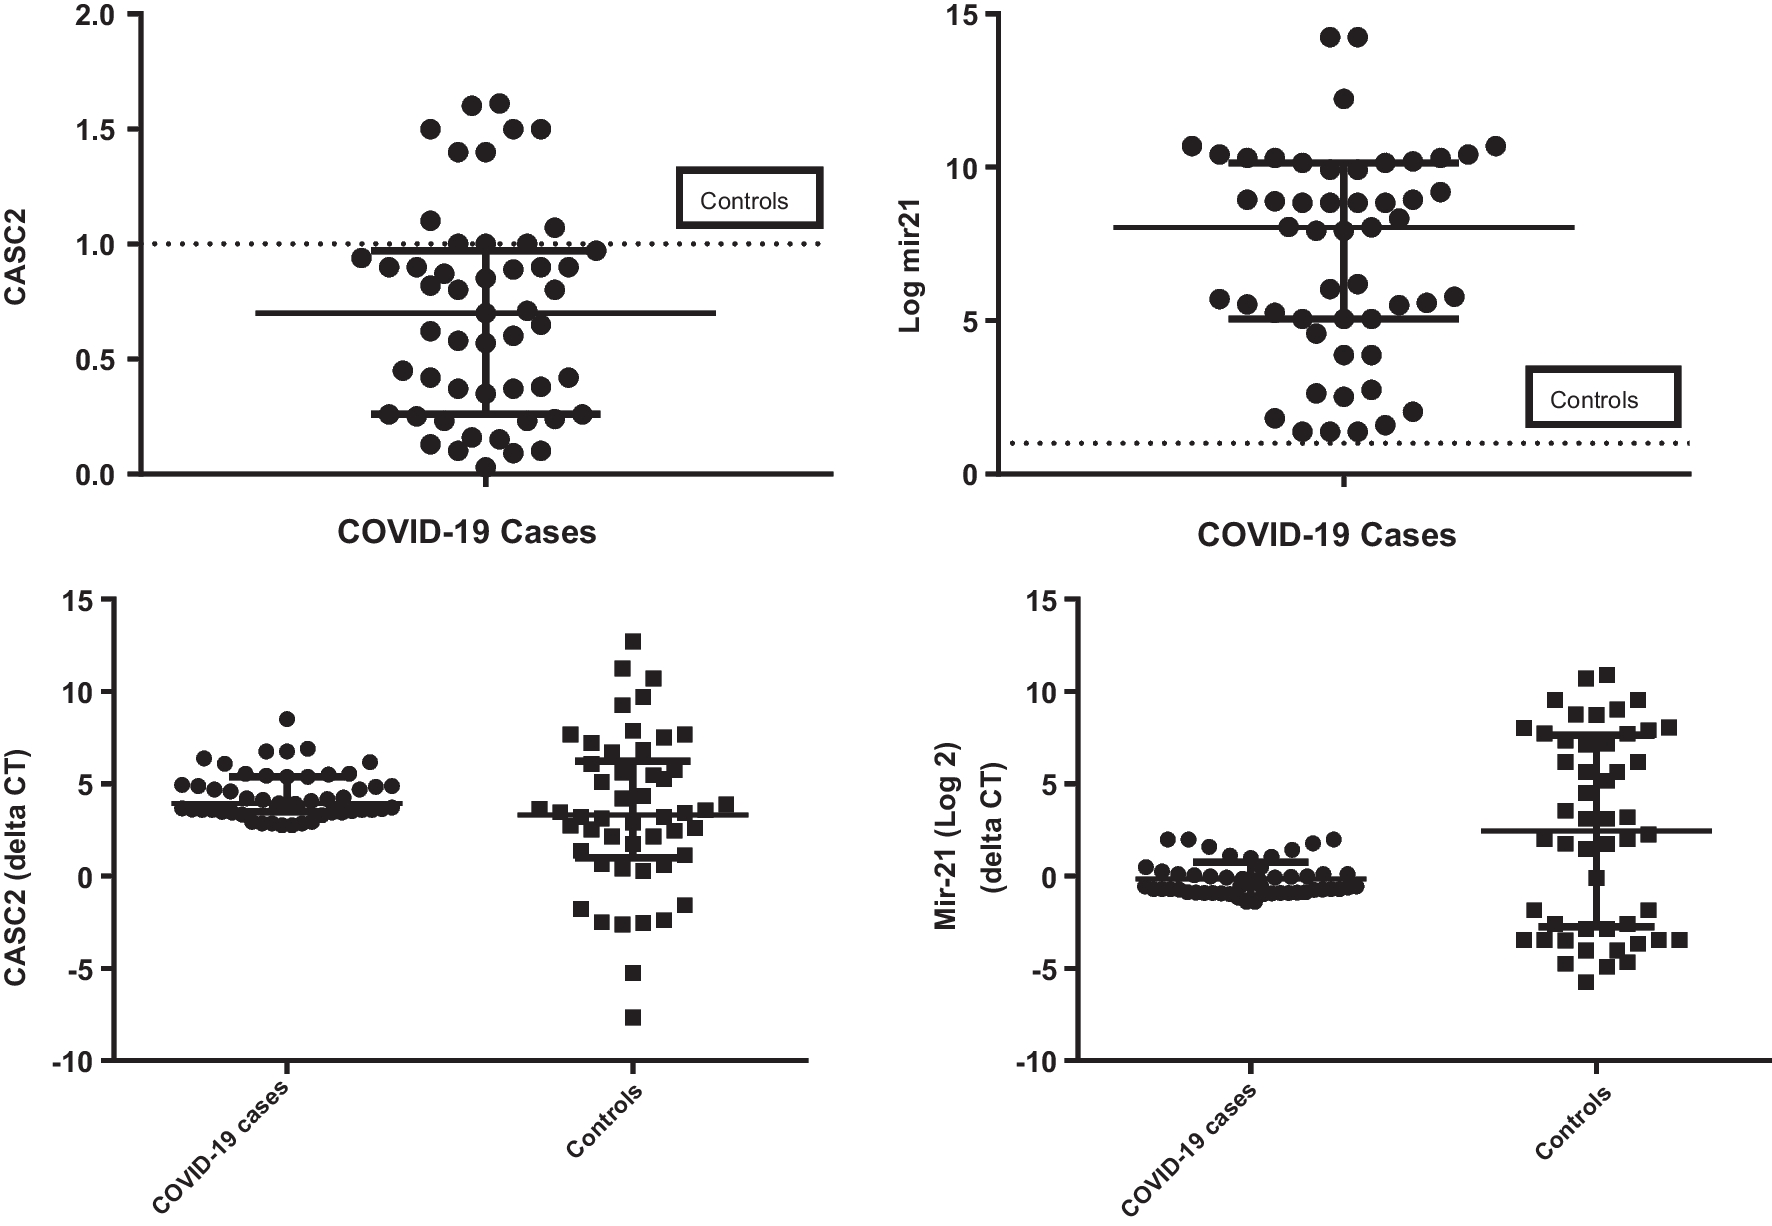 Altered expression of serum lncRNA CASC2 and miRNA-21-5p in COVID-19 patients